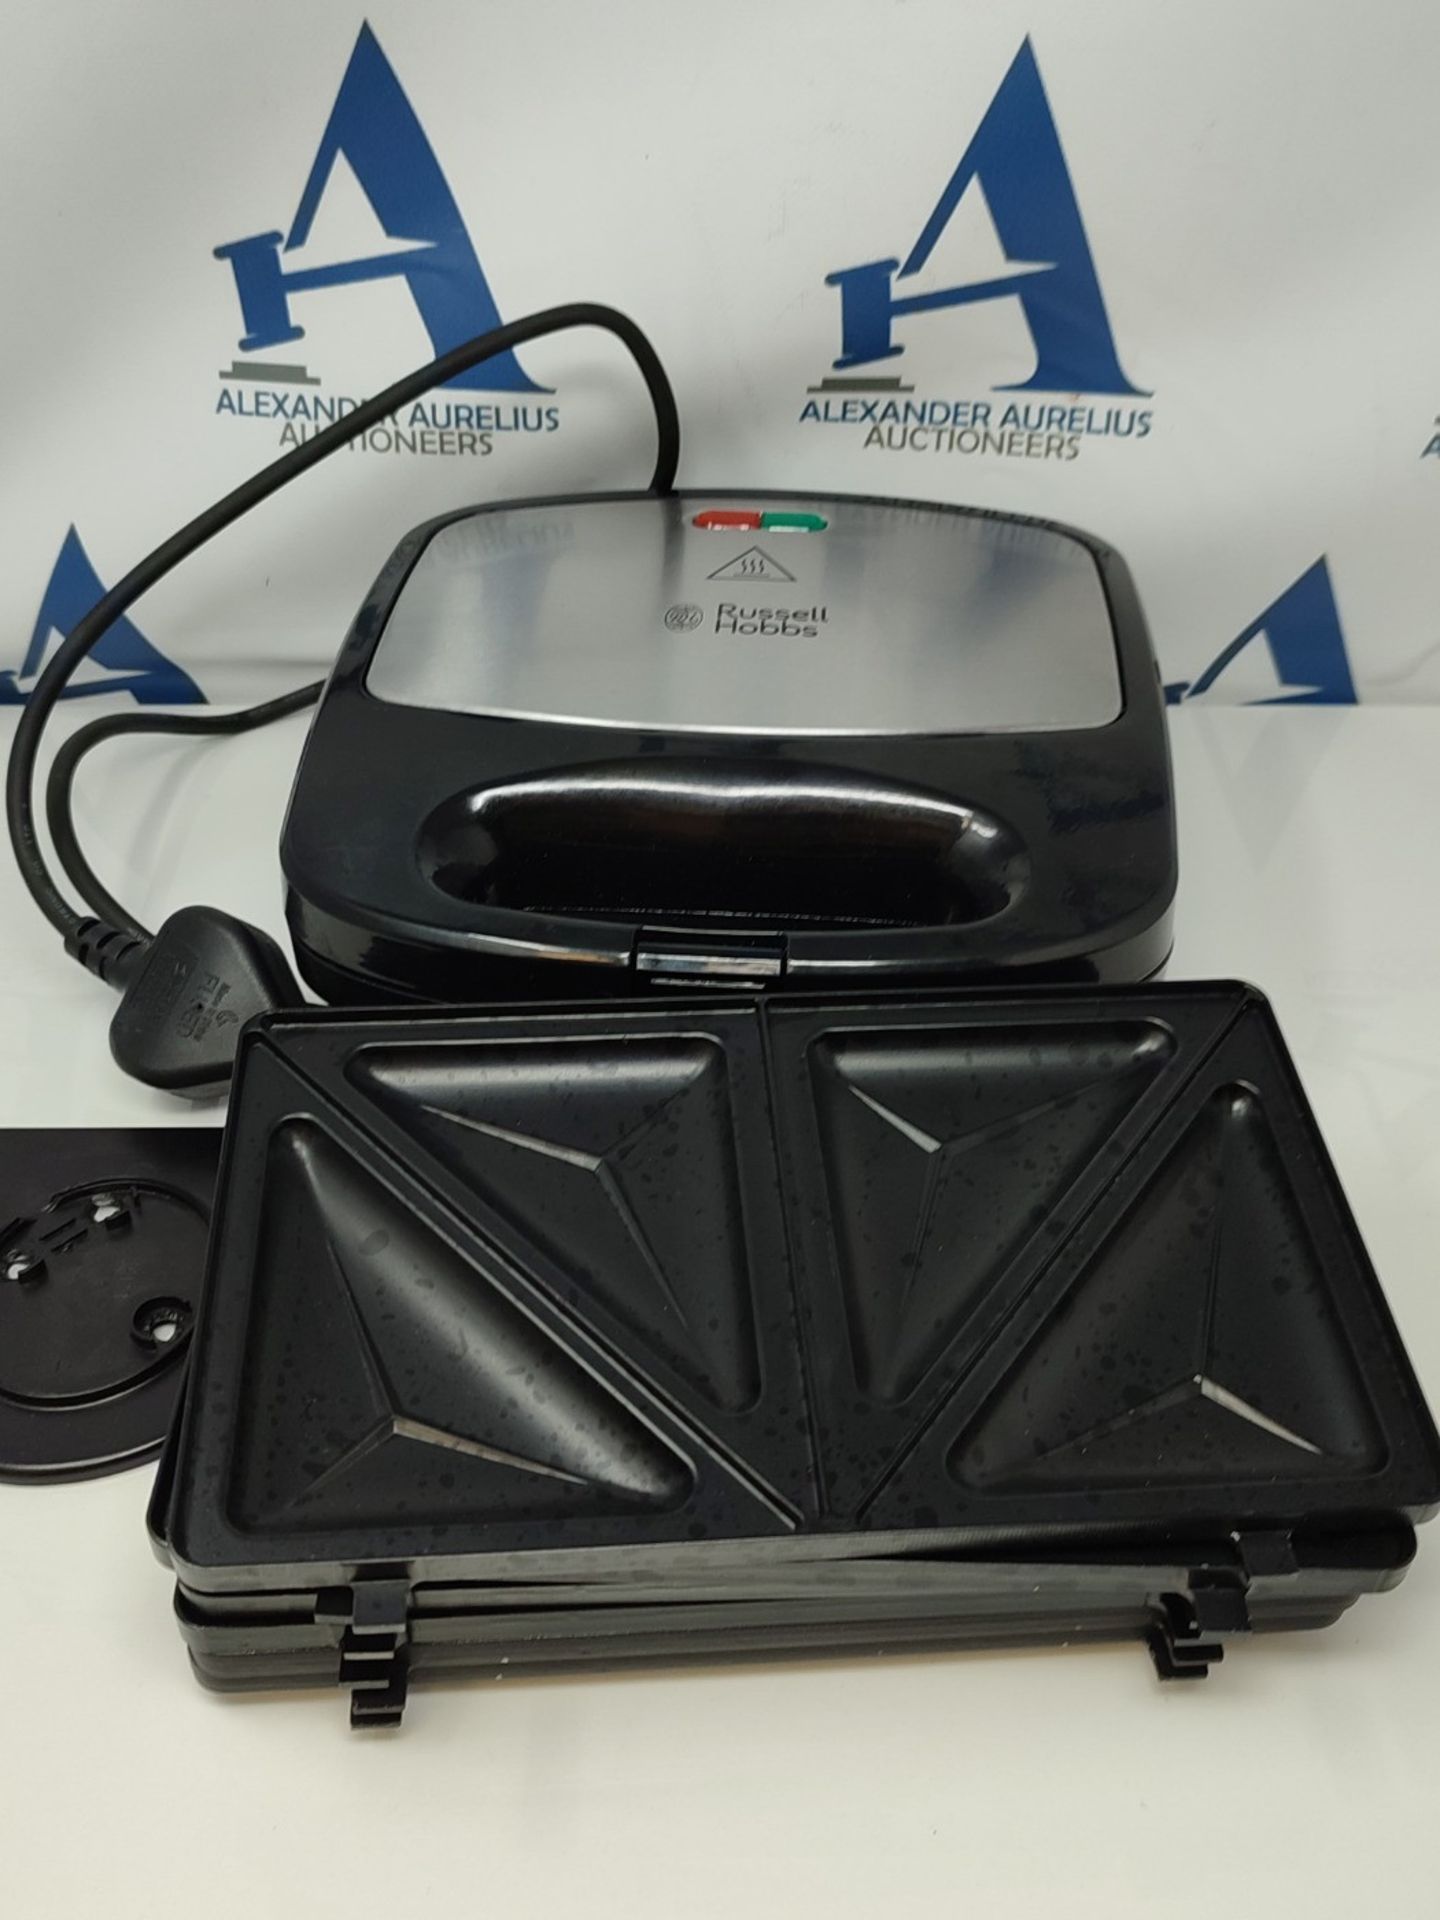 Russell Hobbs 4008496937660 RU-24540 3-in-1 Sandwich/Panini and Waffle Maker, 760 W, B - Image 3 of 3